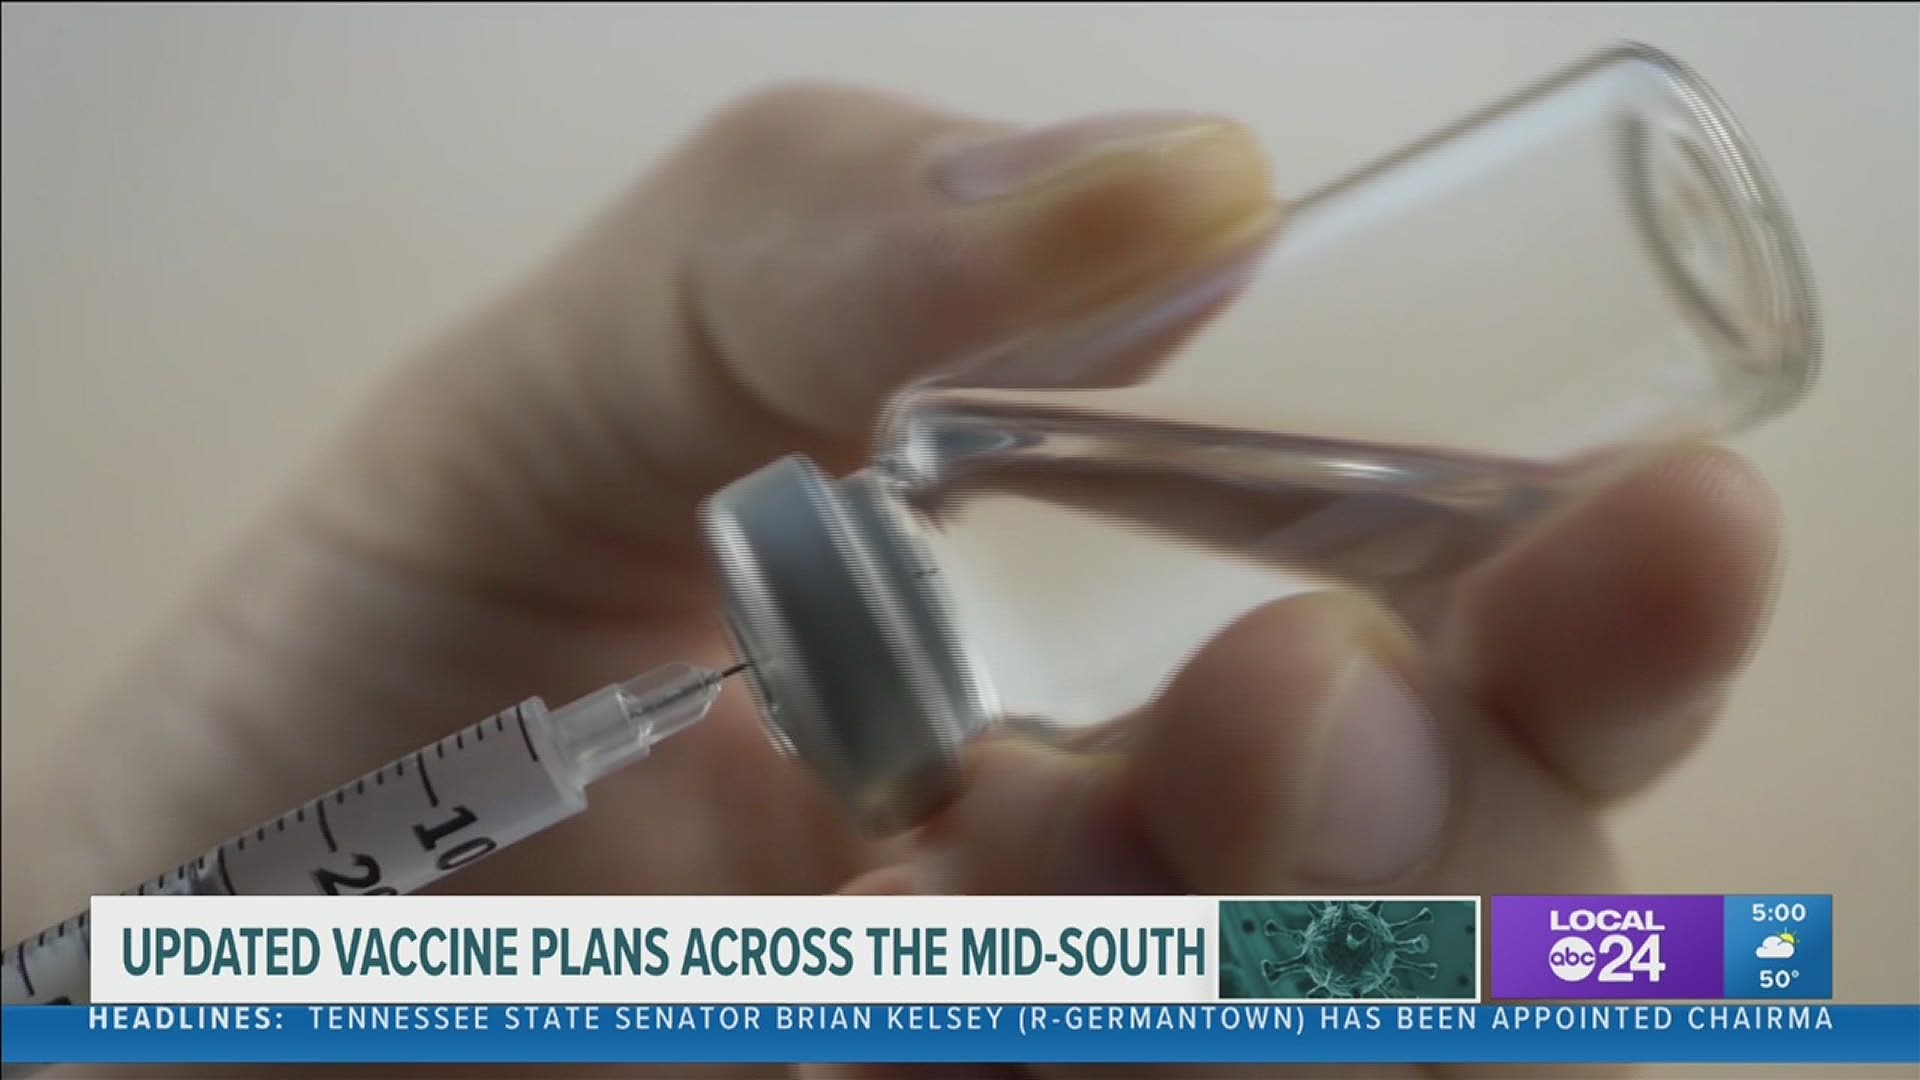 Local 24 News’ Brad Broders looks at the vaccination plans for Tennessee, Mississippi, and Arkansas.